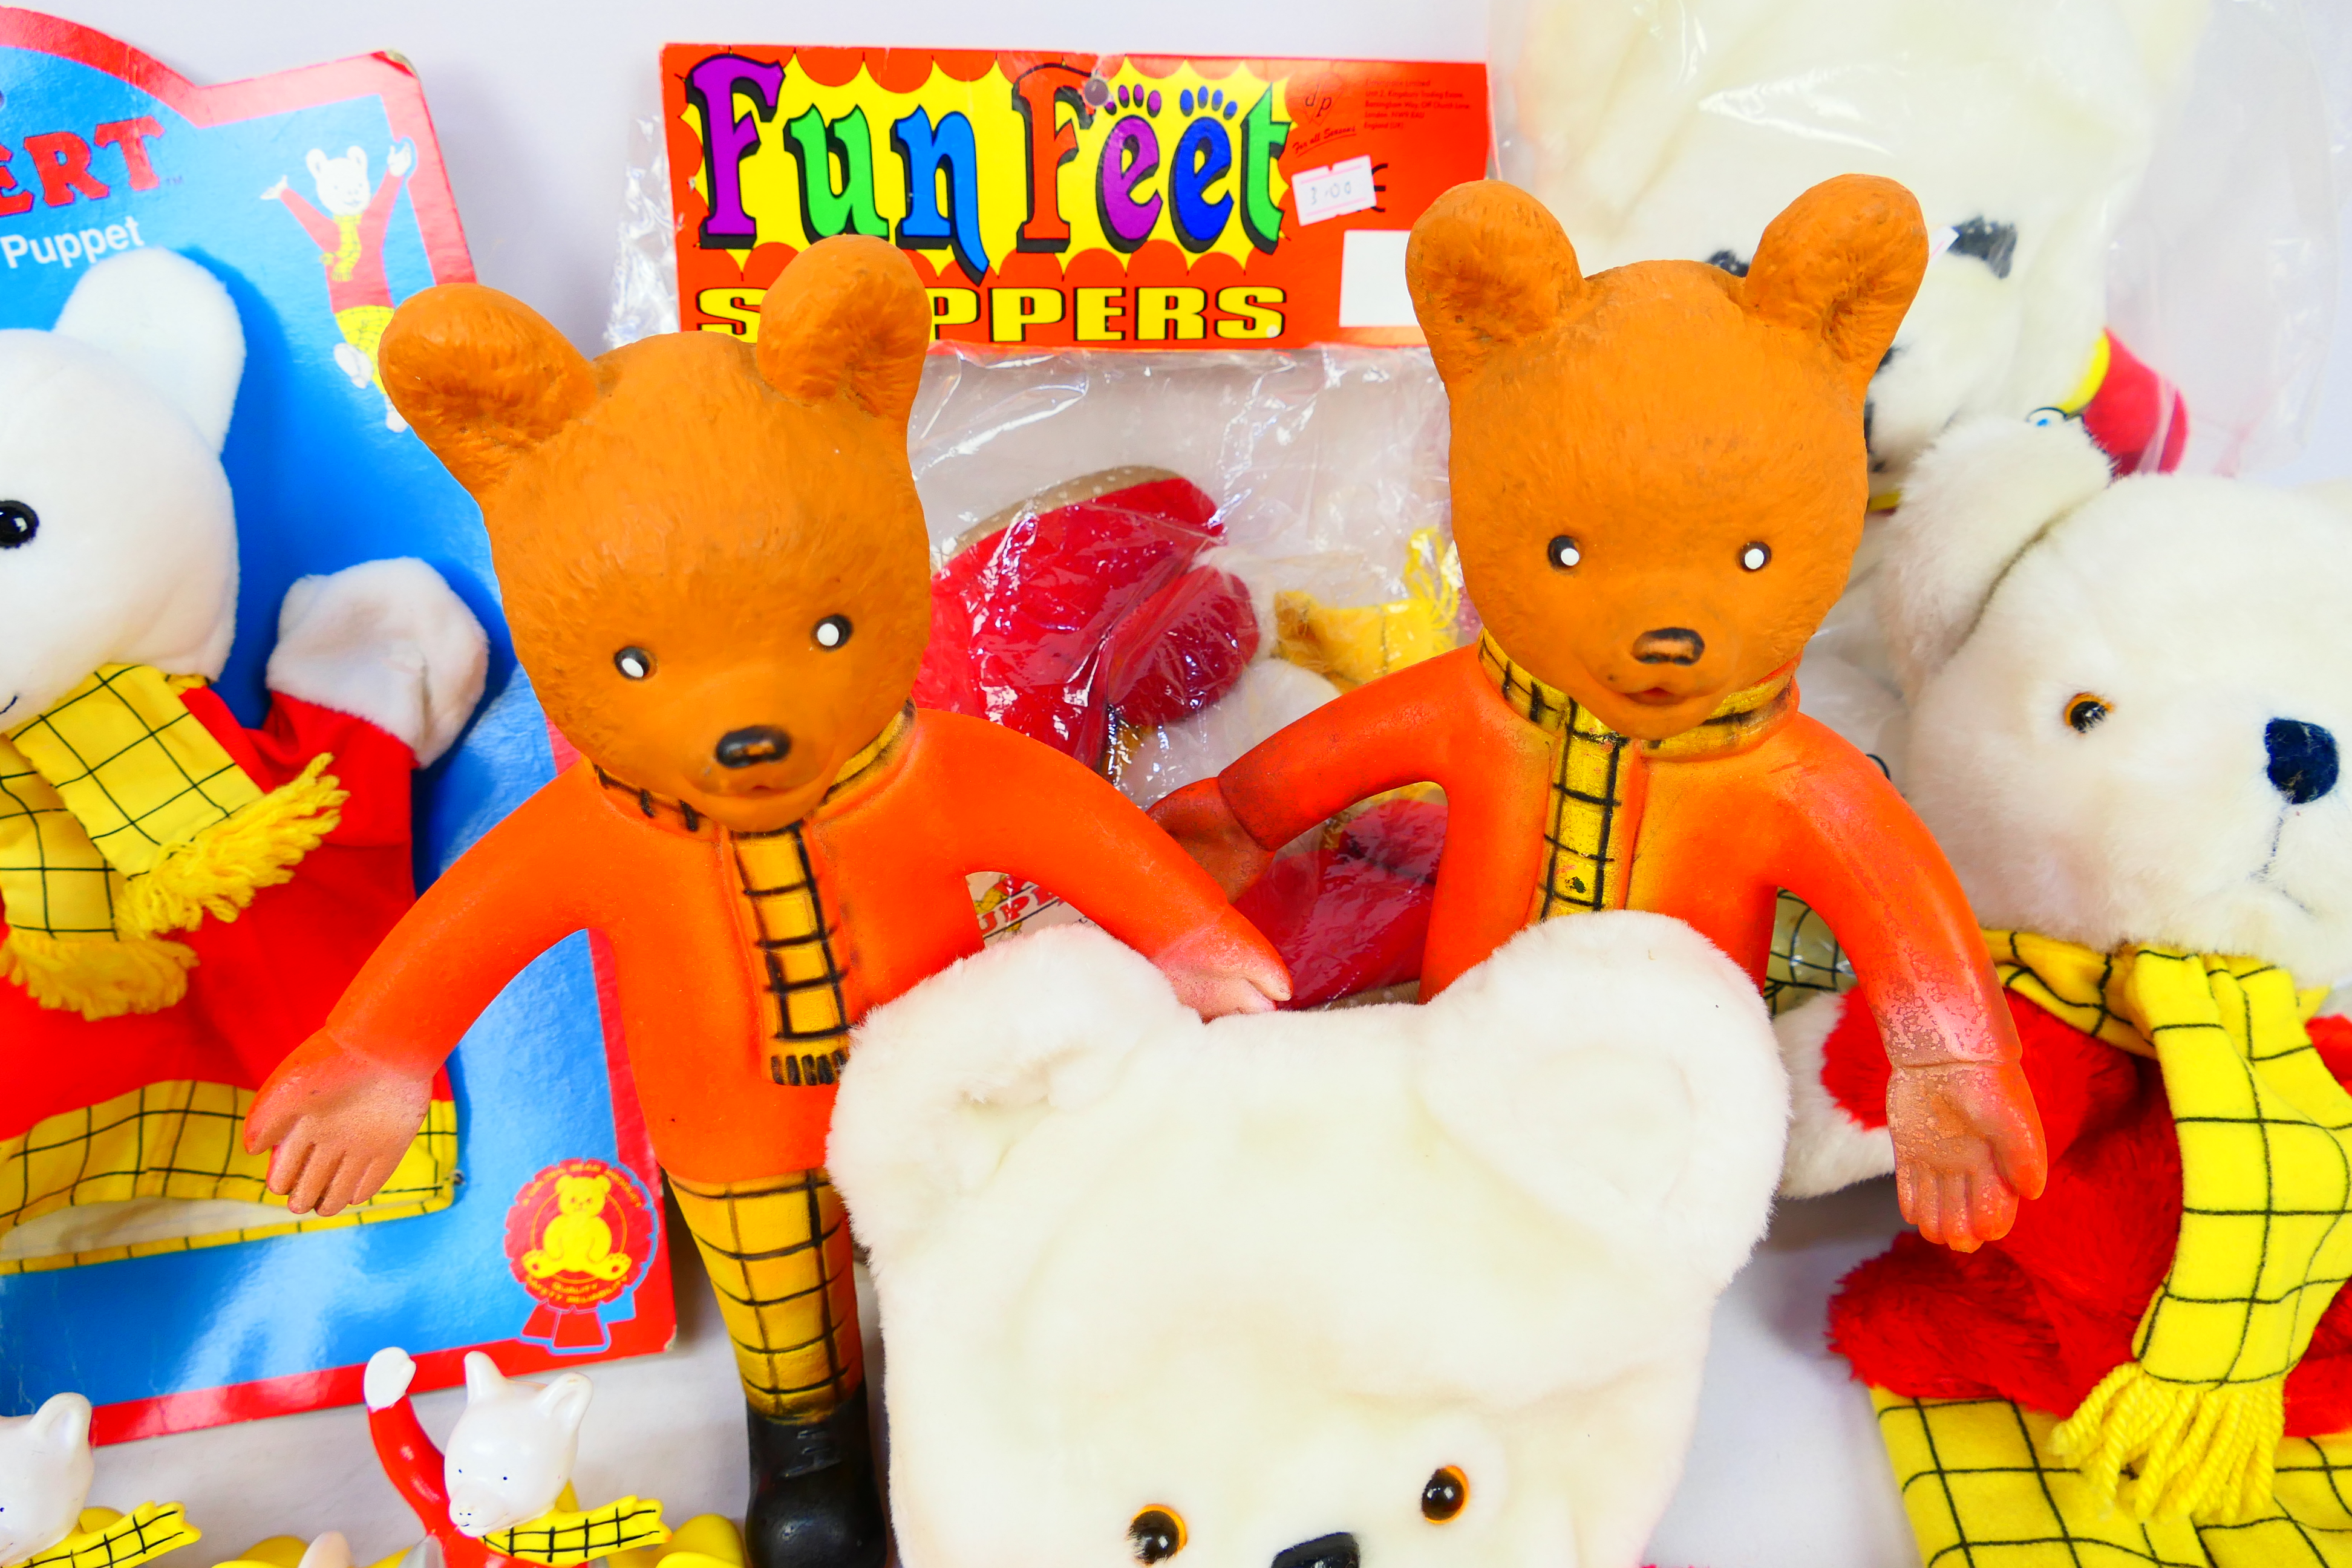 Golden Bear - Boots - Others - A group of Rupert the Bear themed toys, and novelty items, - Image 6 of 8